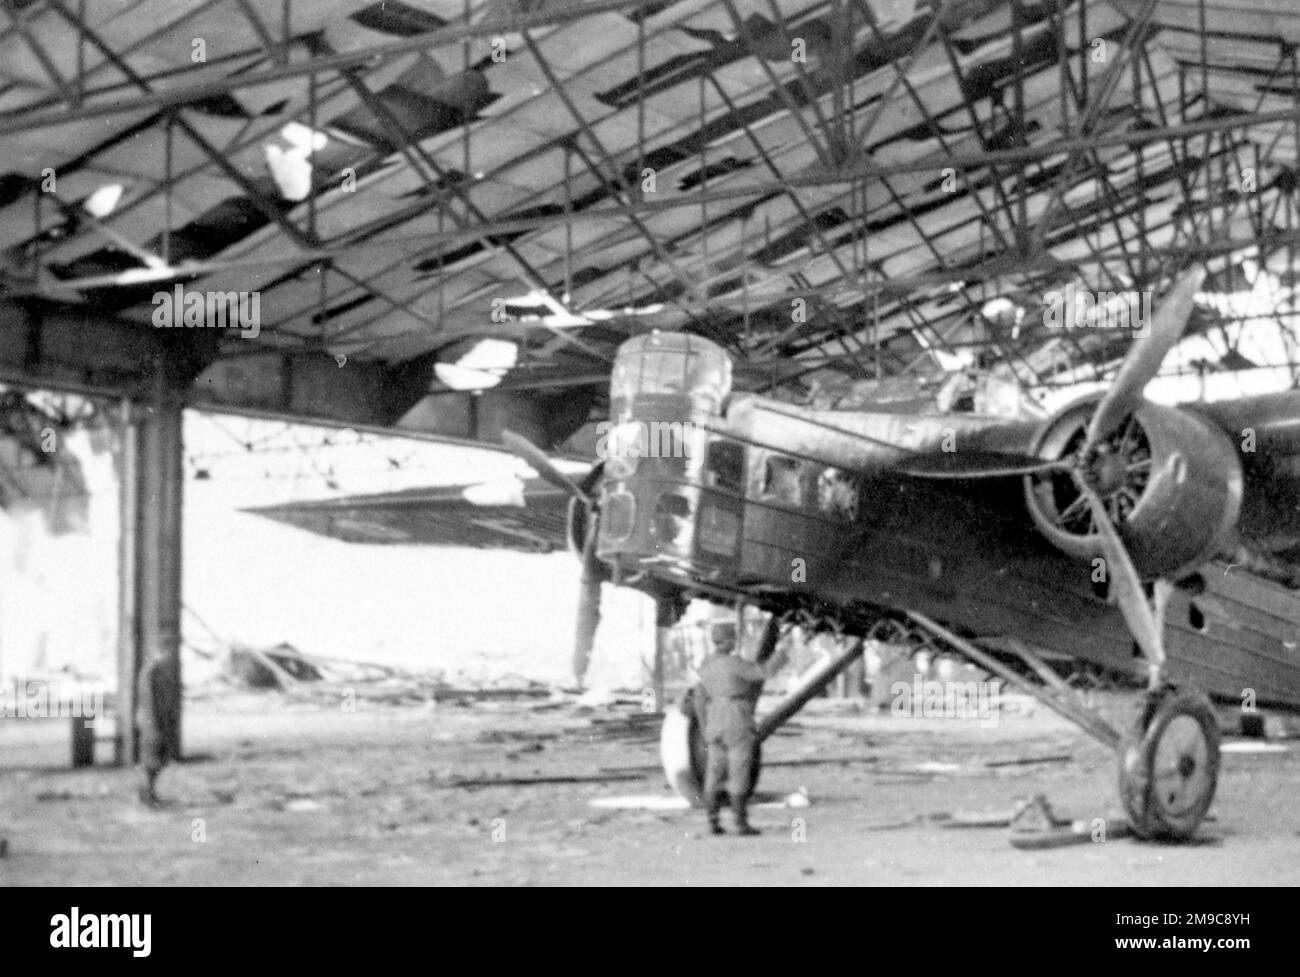 An abandoned Bloch MB.200, captured by German forces in a damaged hangar. Stock Photo